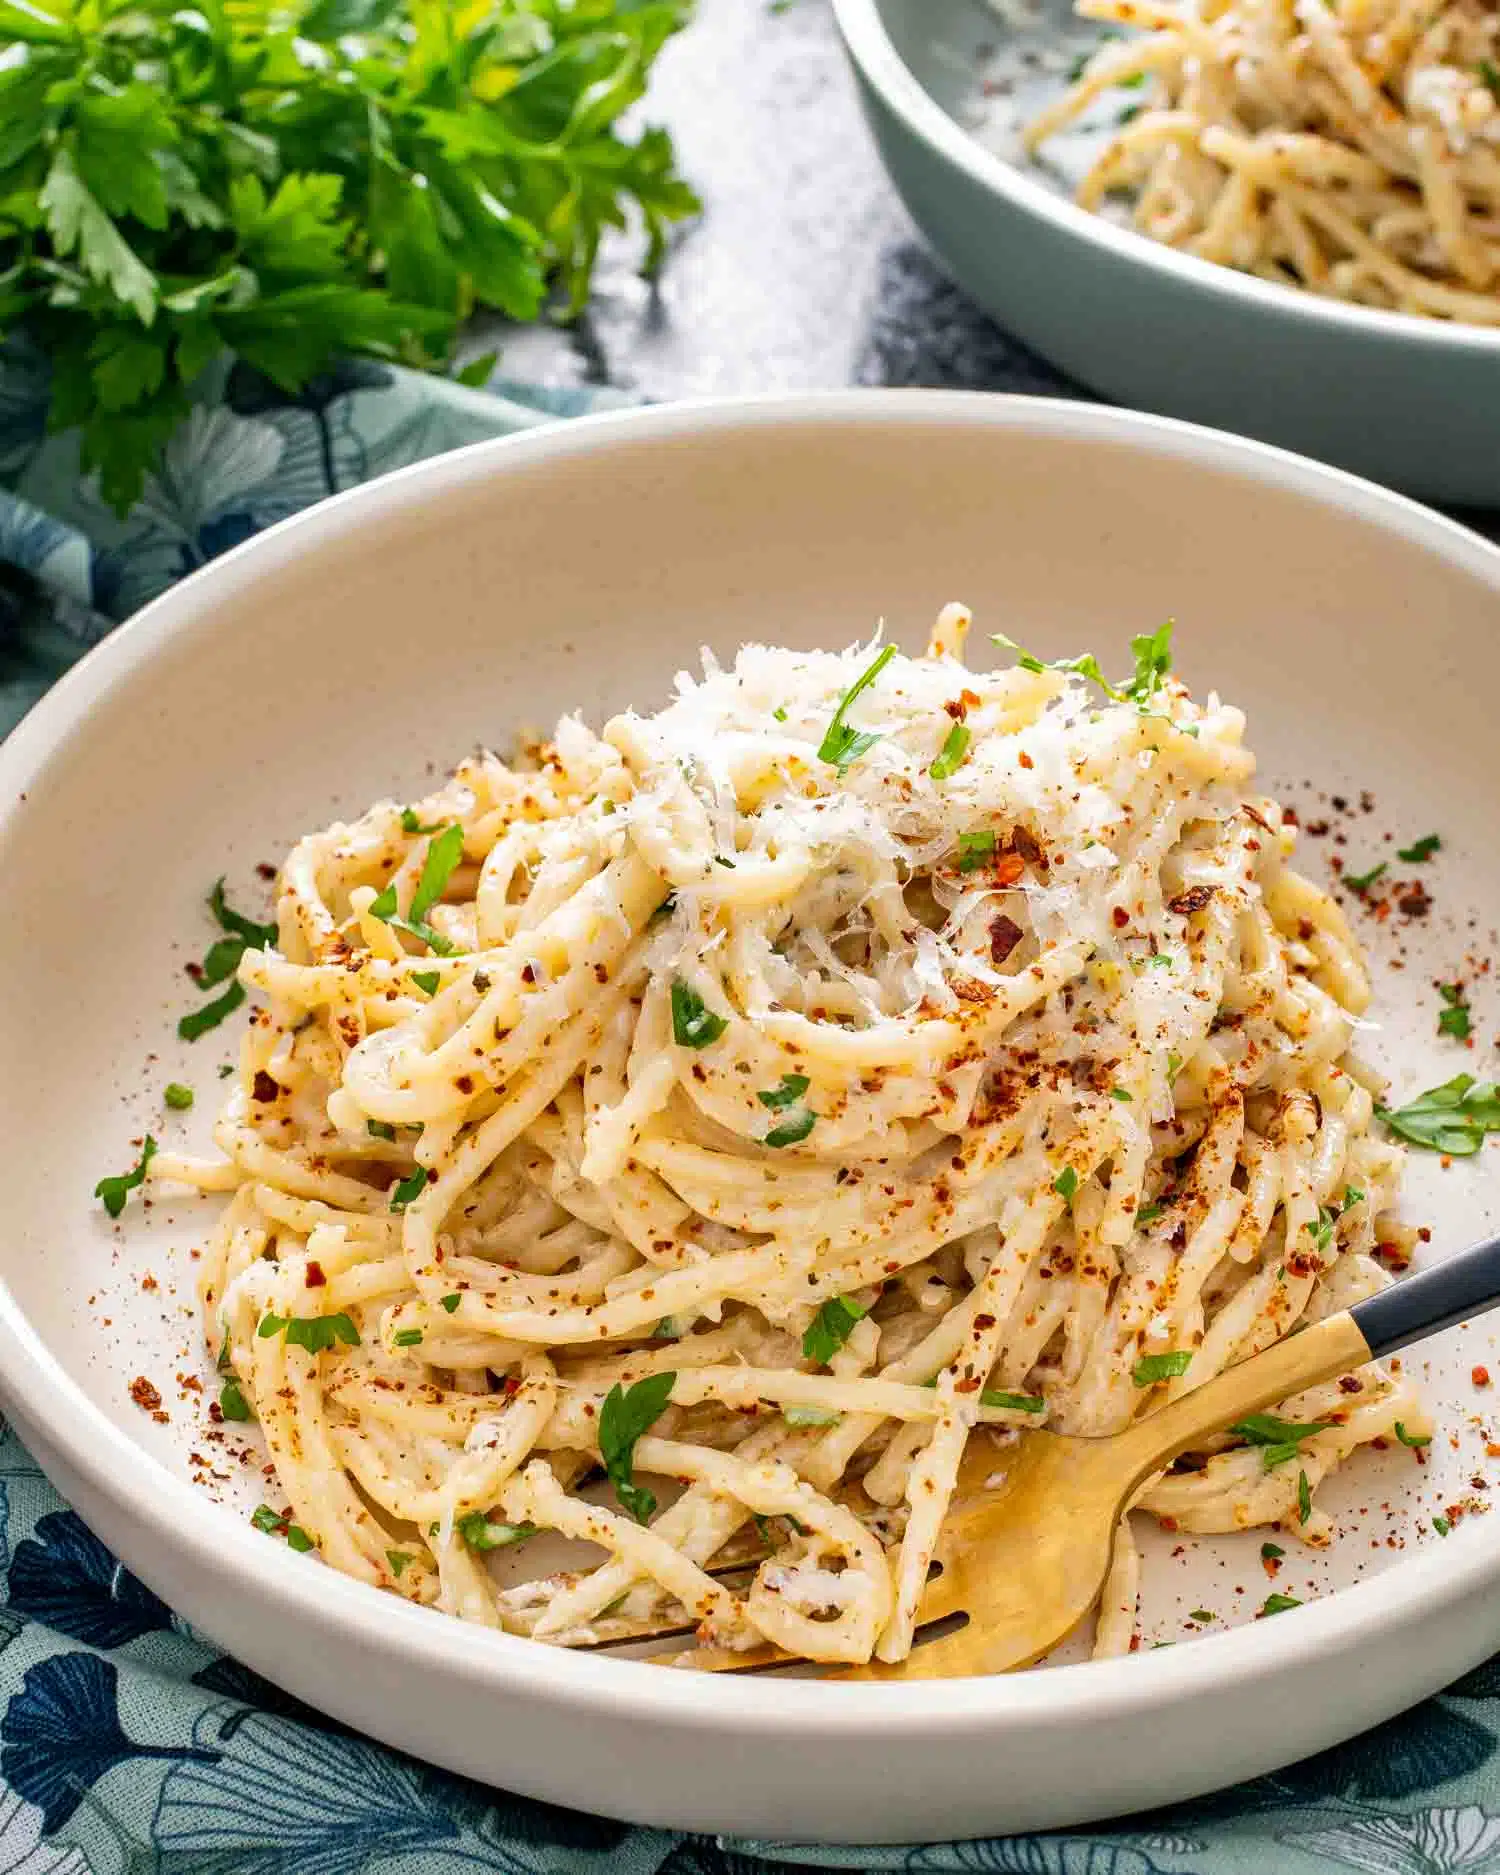 Half and Half vs Heavy Cream in Pasta: What's the Difference and